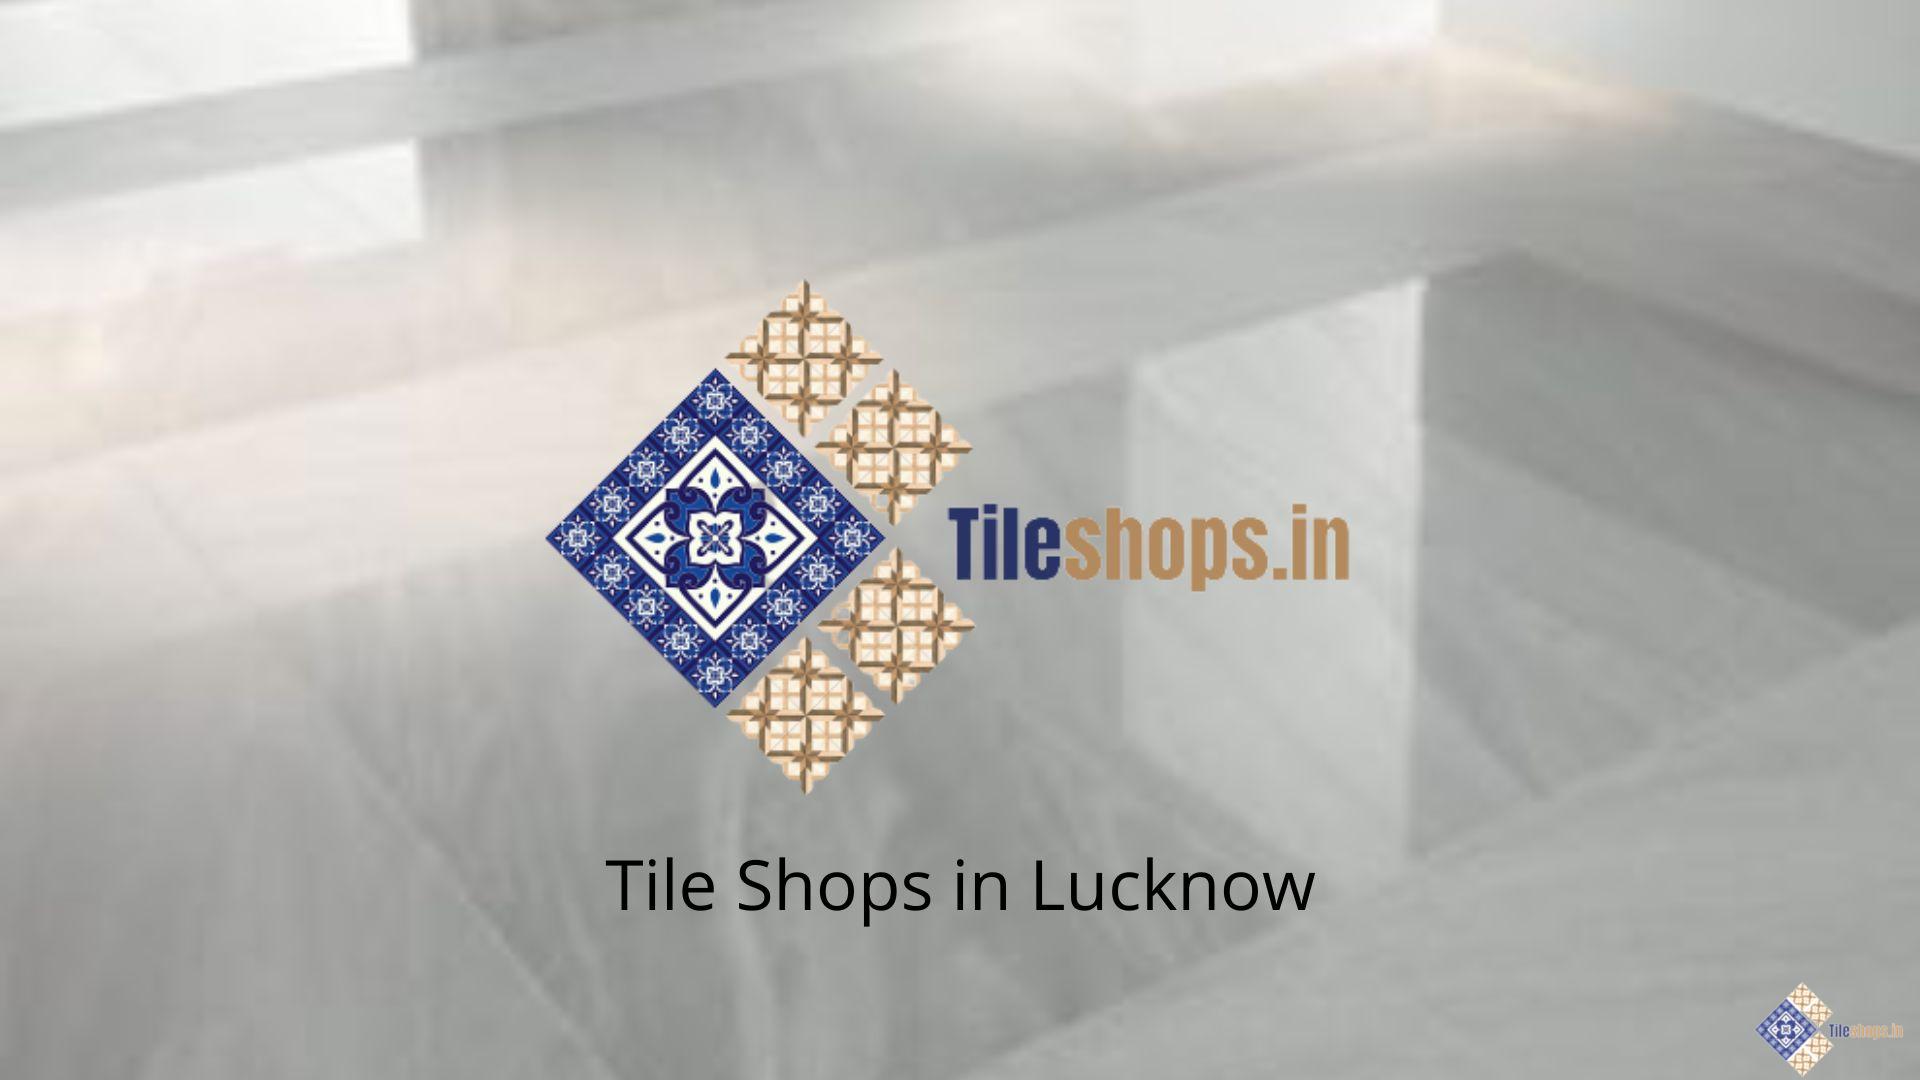 Tile Shops in Lucknow